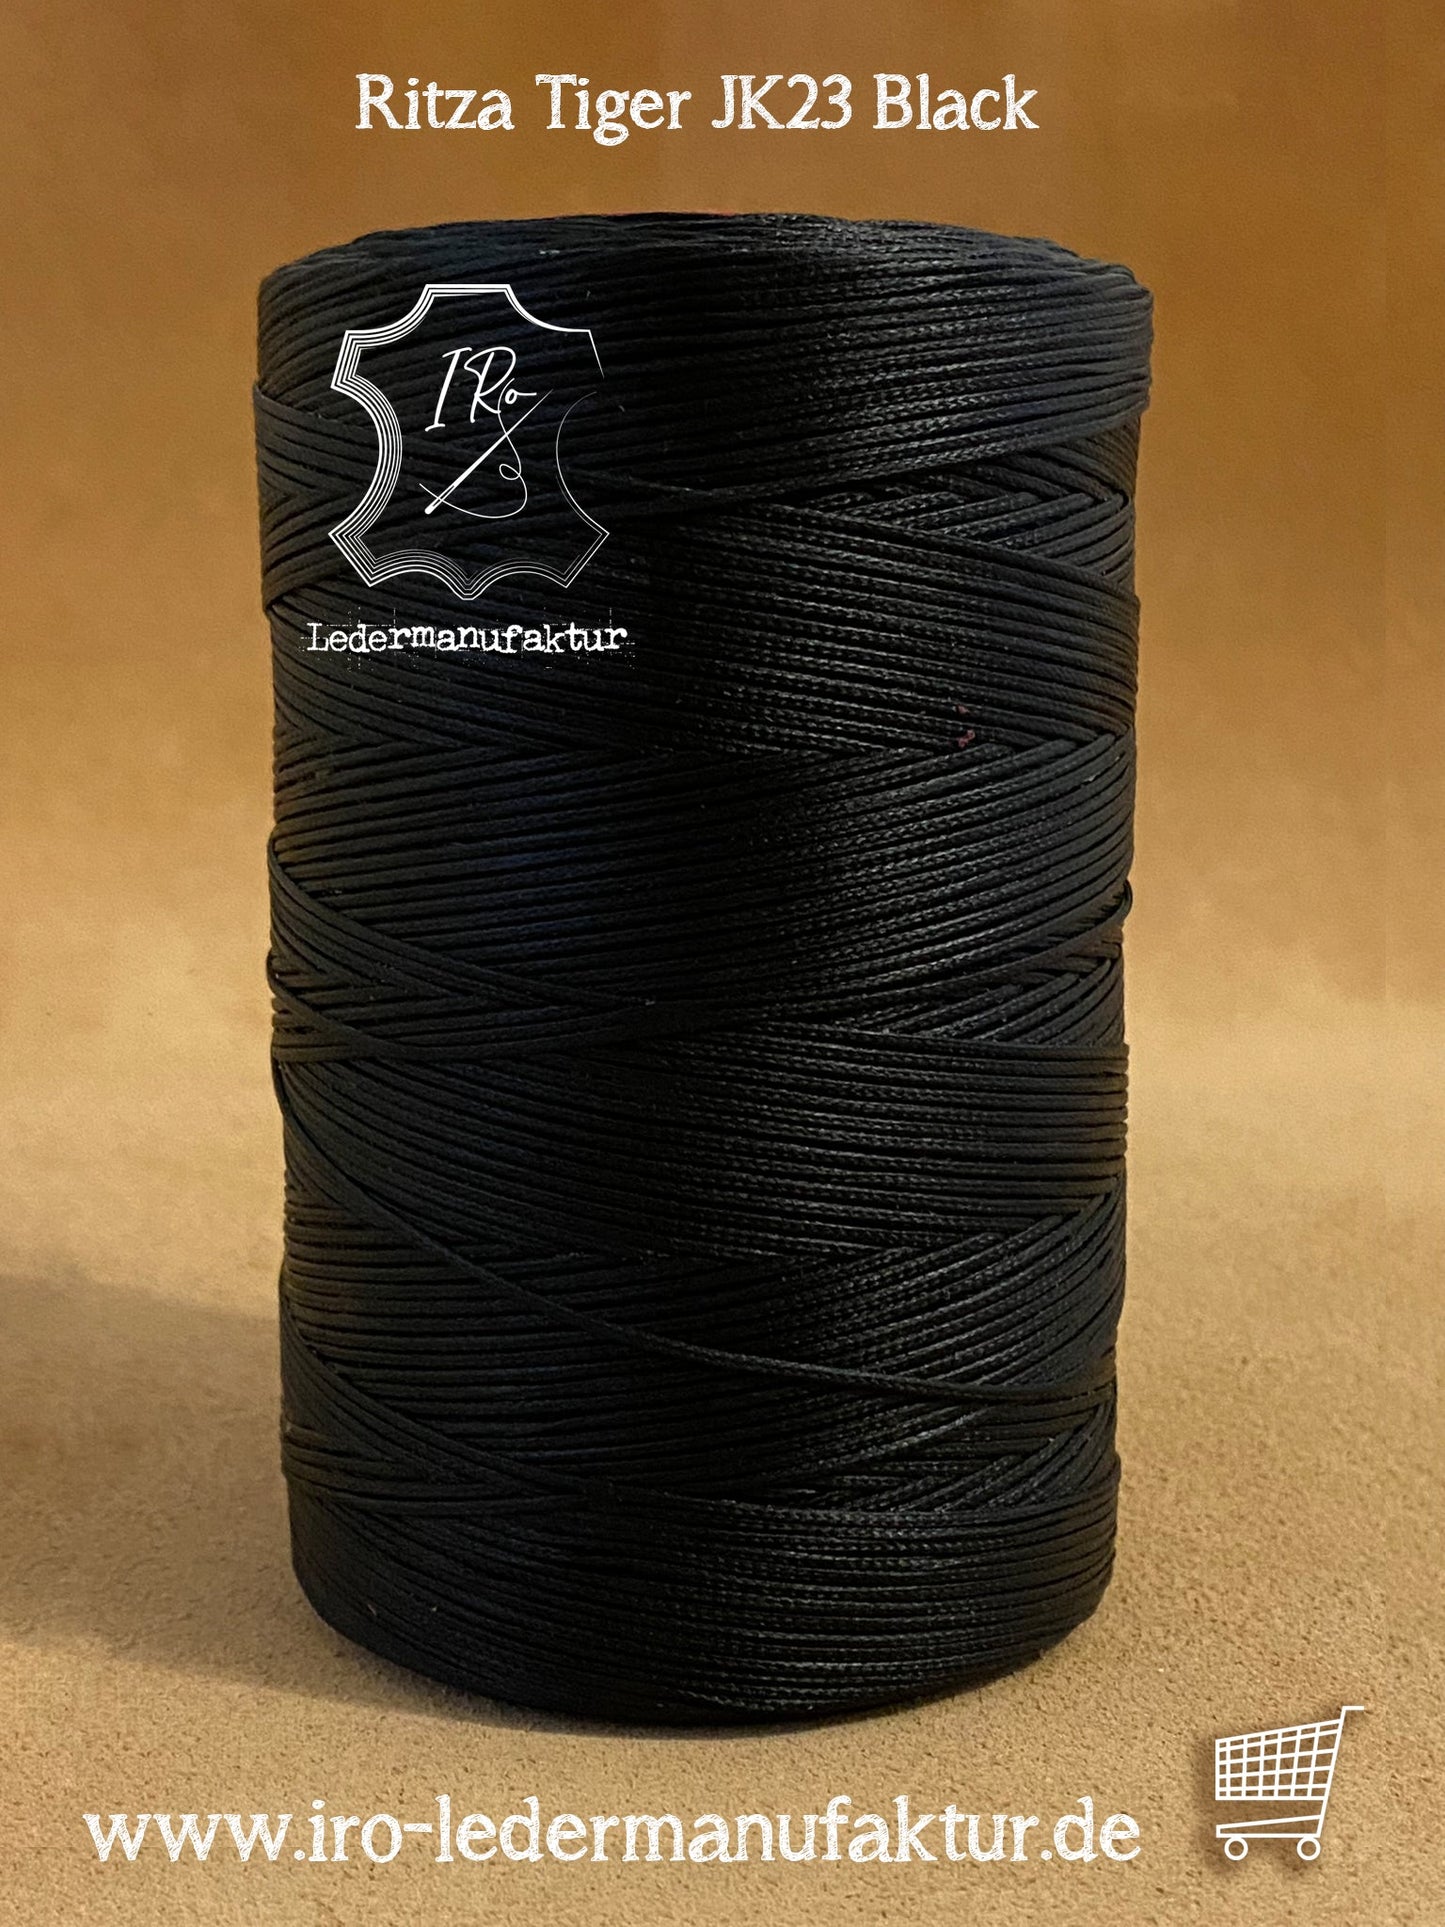 1 mm Ritza 25 tiger 500 m Spule | Sewing thread for leather, waxed. Hand stitch, hand sewing thread, flat shape